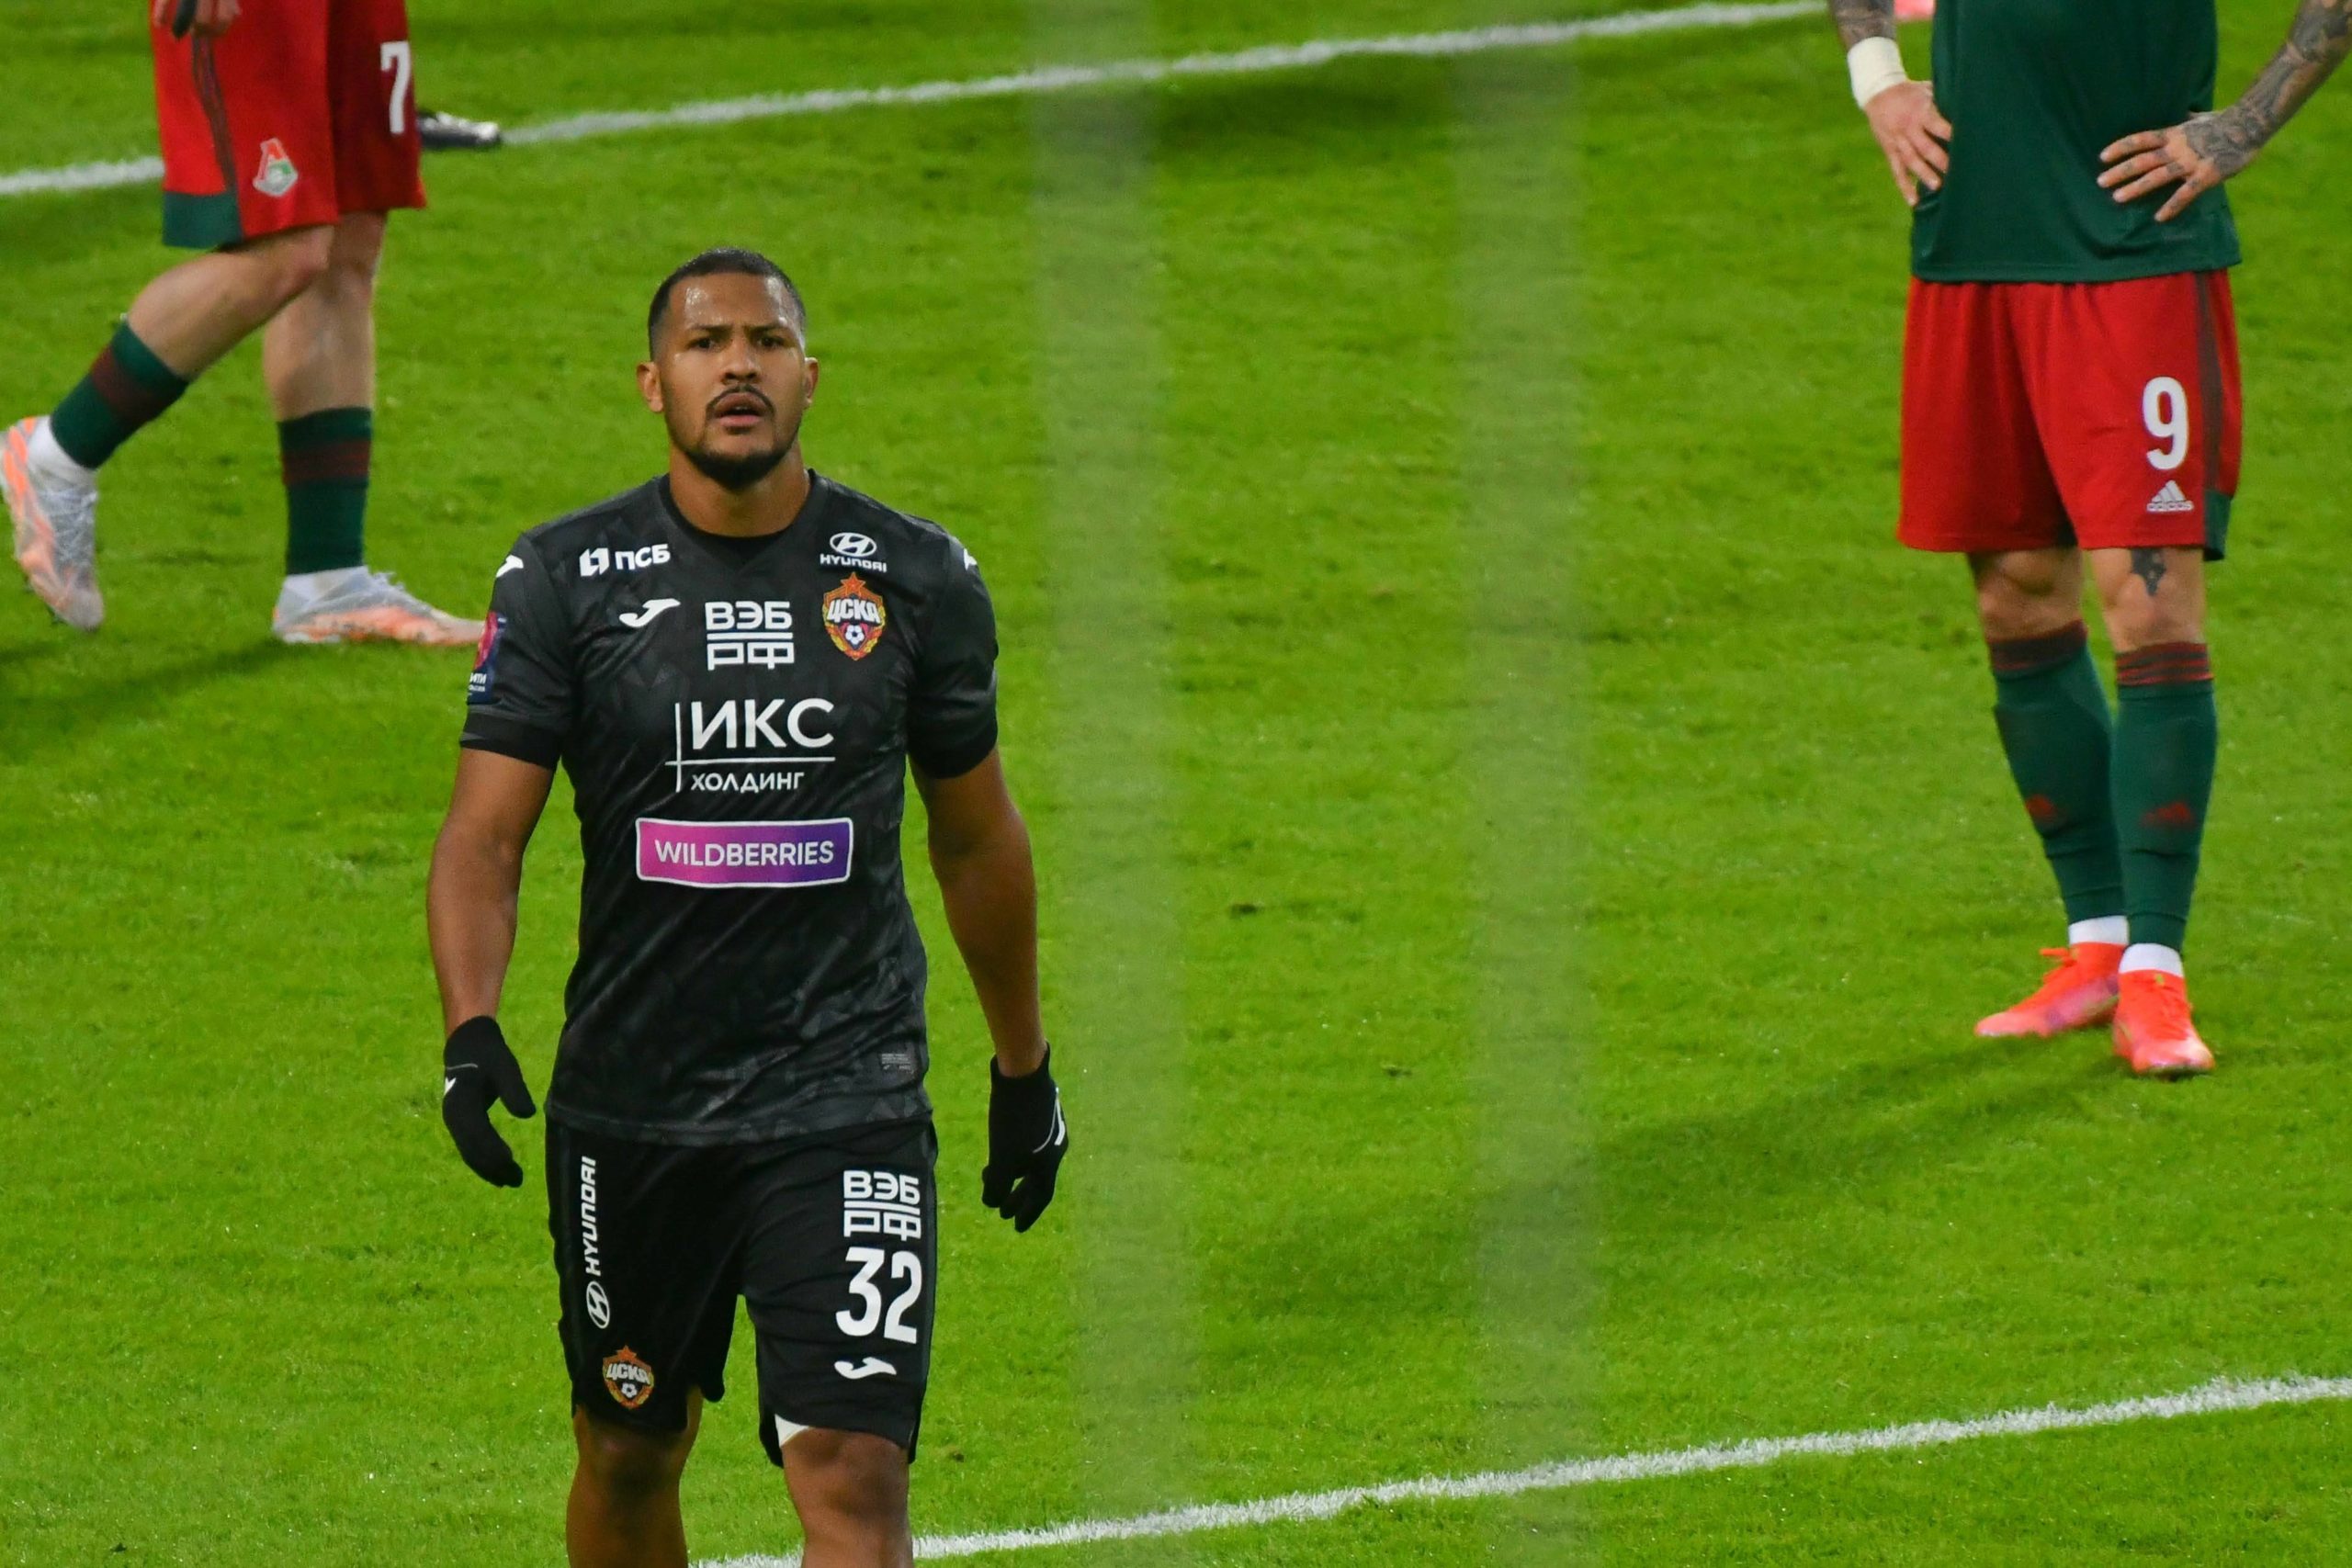 Everton complete the capture of Salomon Rondon who is seen in the picture